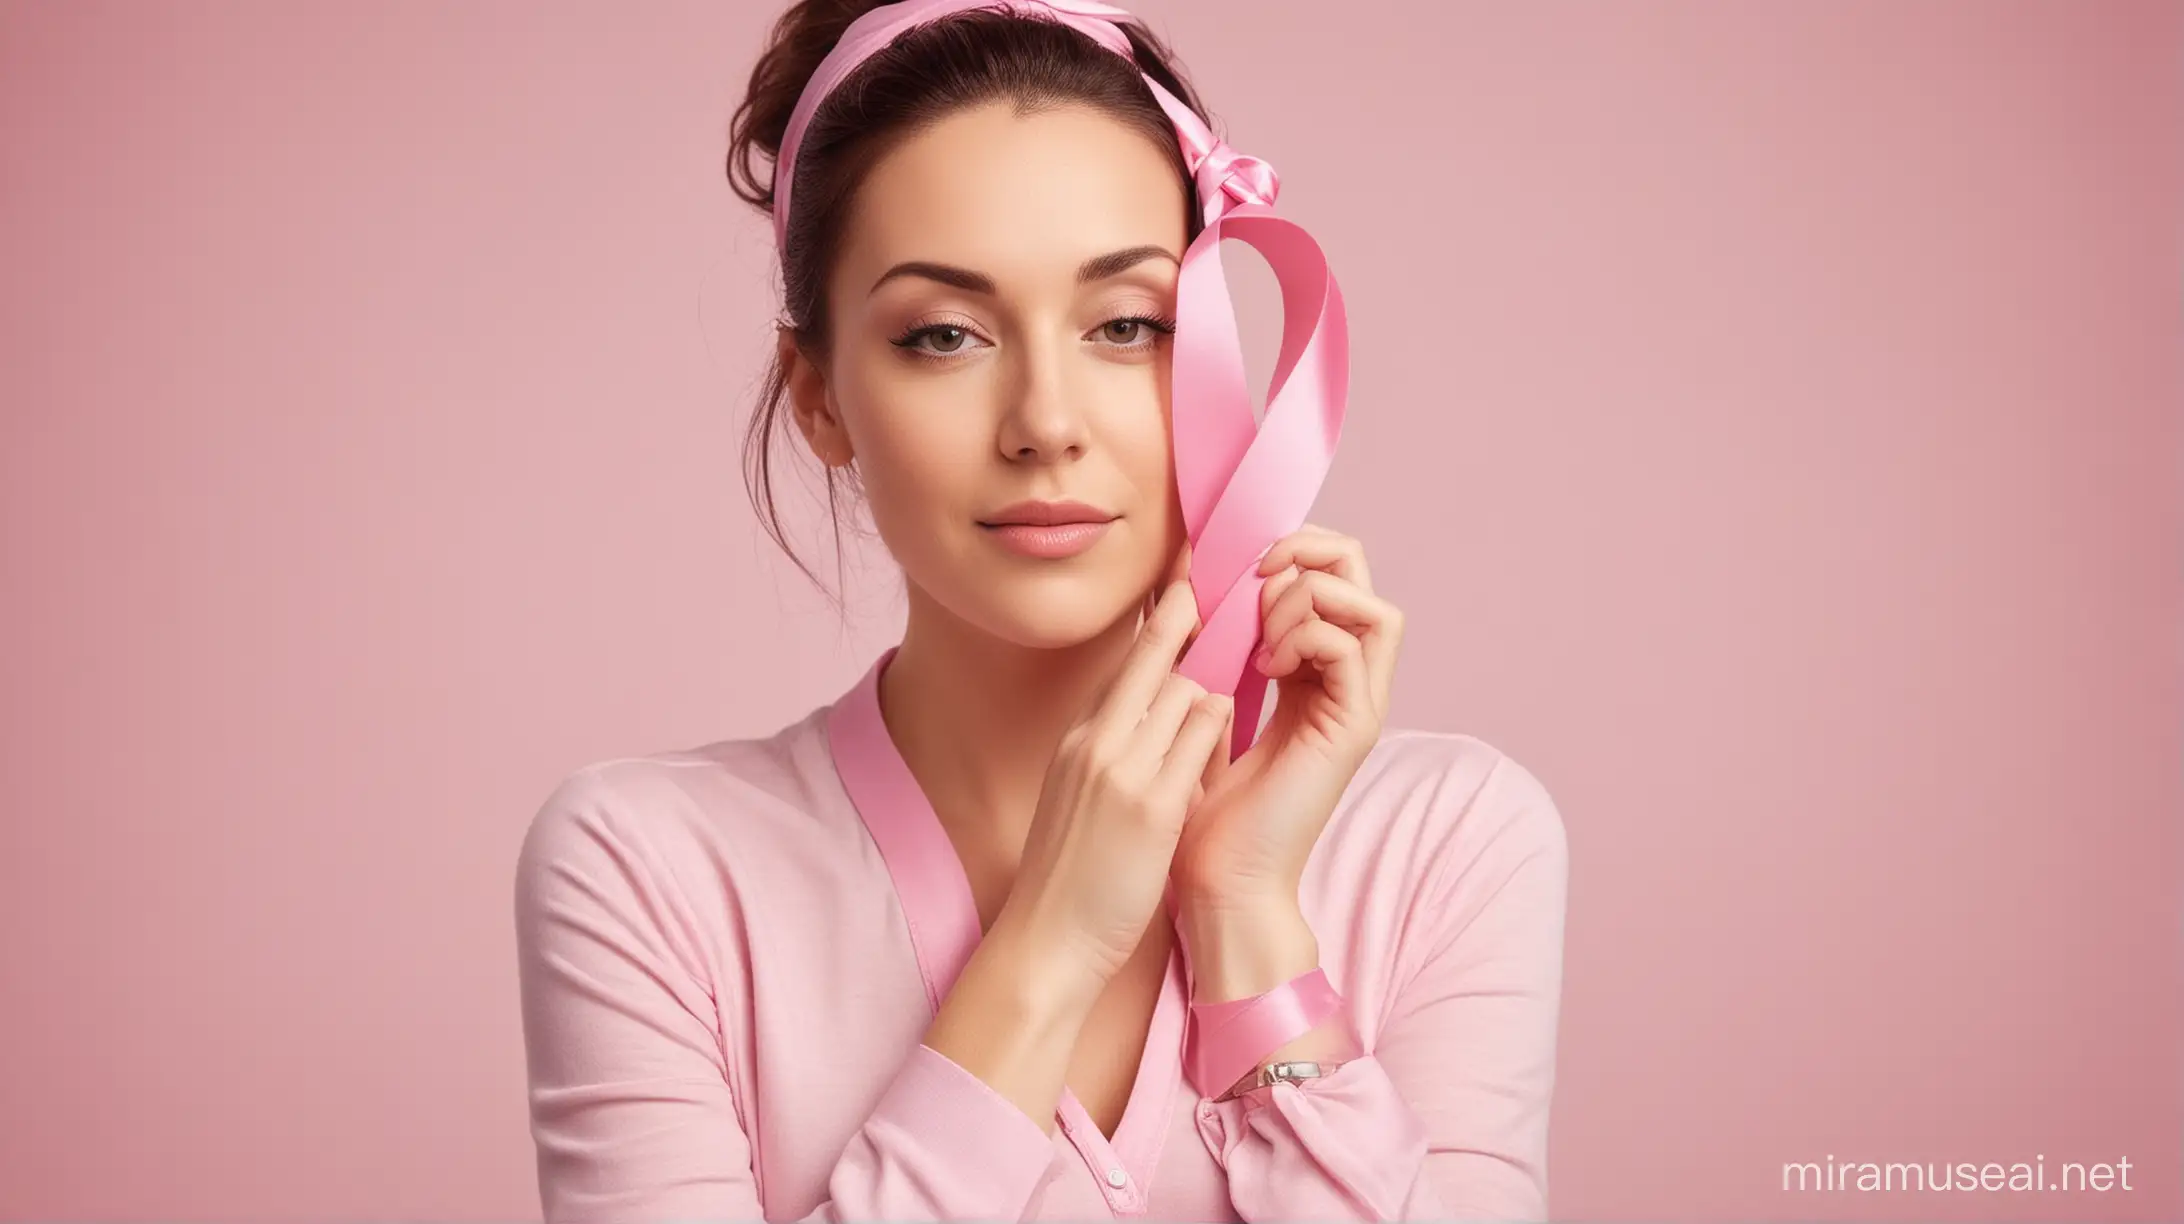 Serene Woman with Pink Ribbon Symbolizing Breast Cancer Awareness and Support